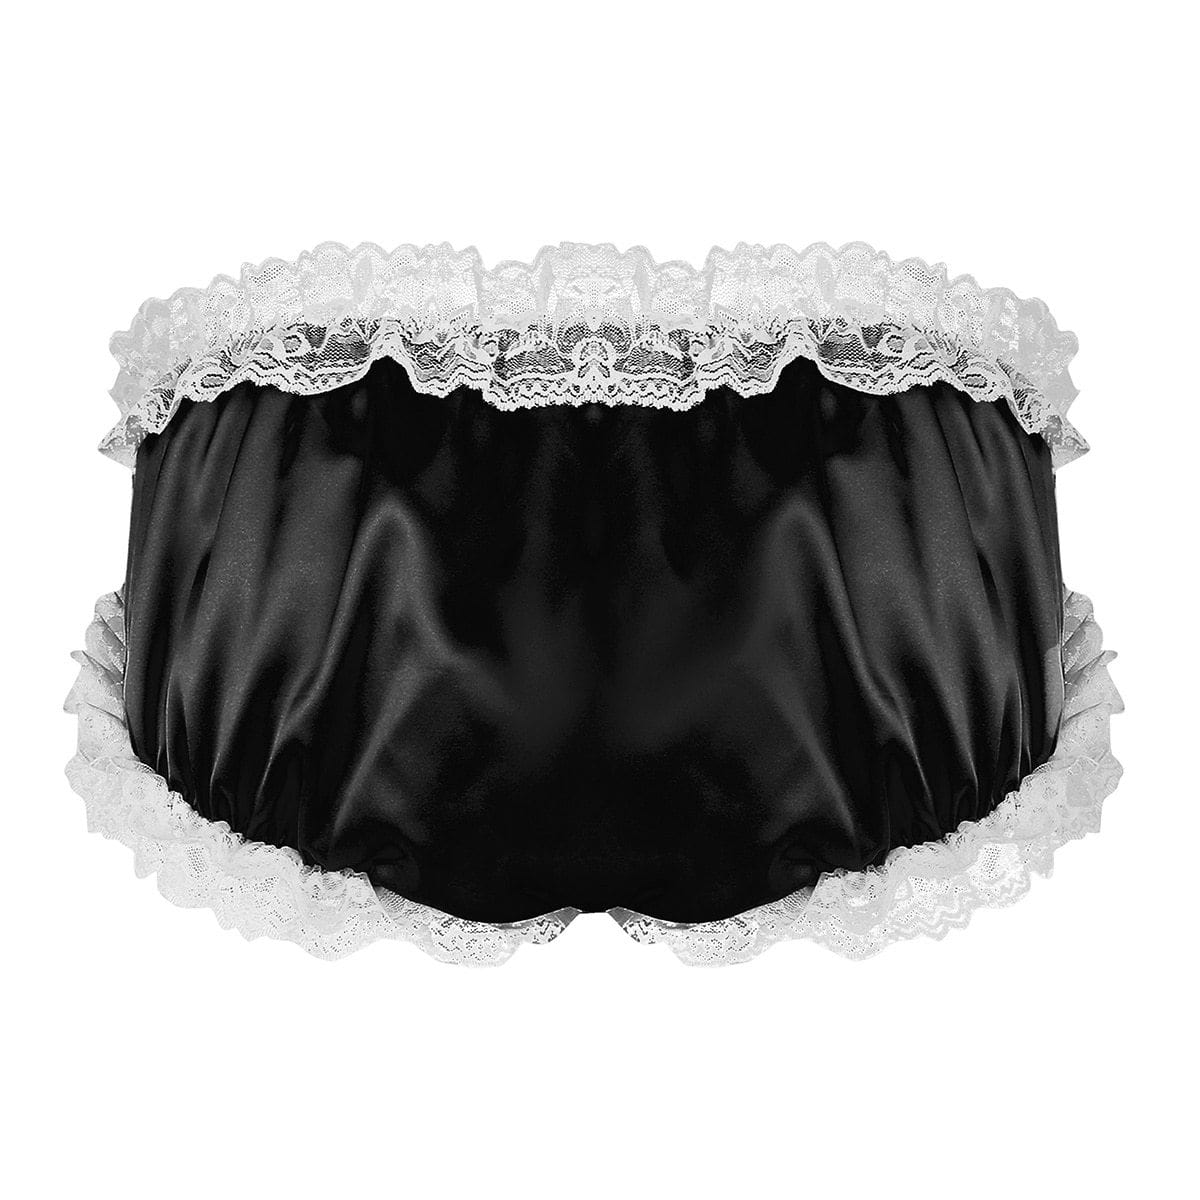 sissy adult baby satin ruffle panties mens lingerie knickers all